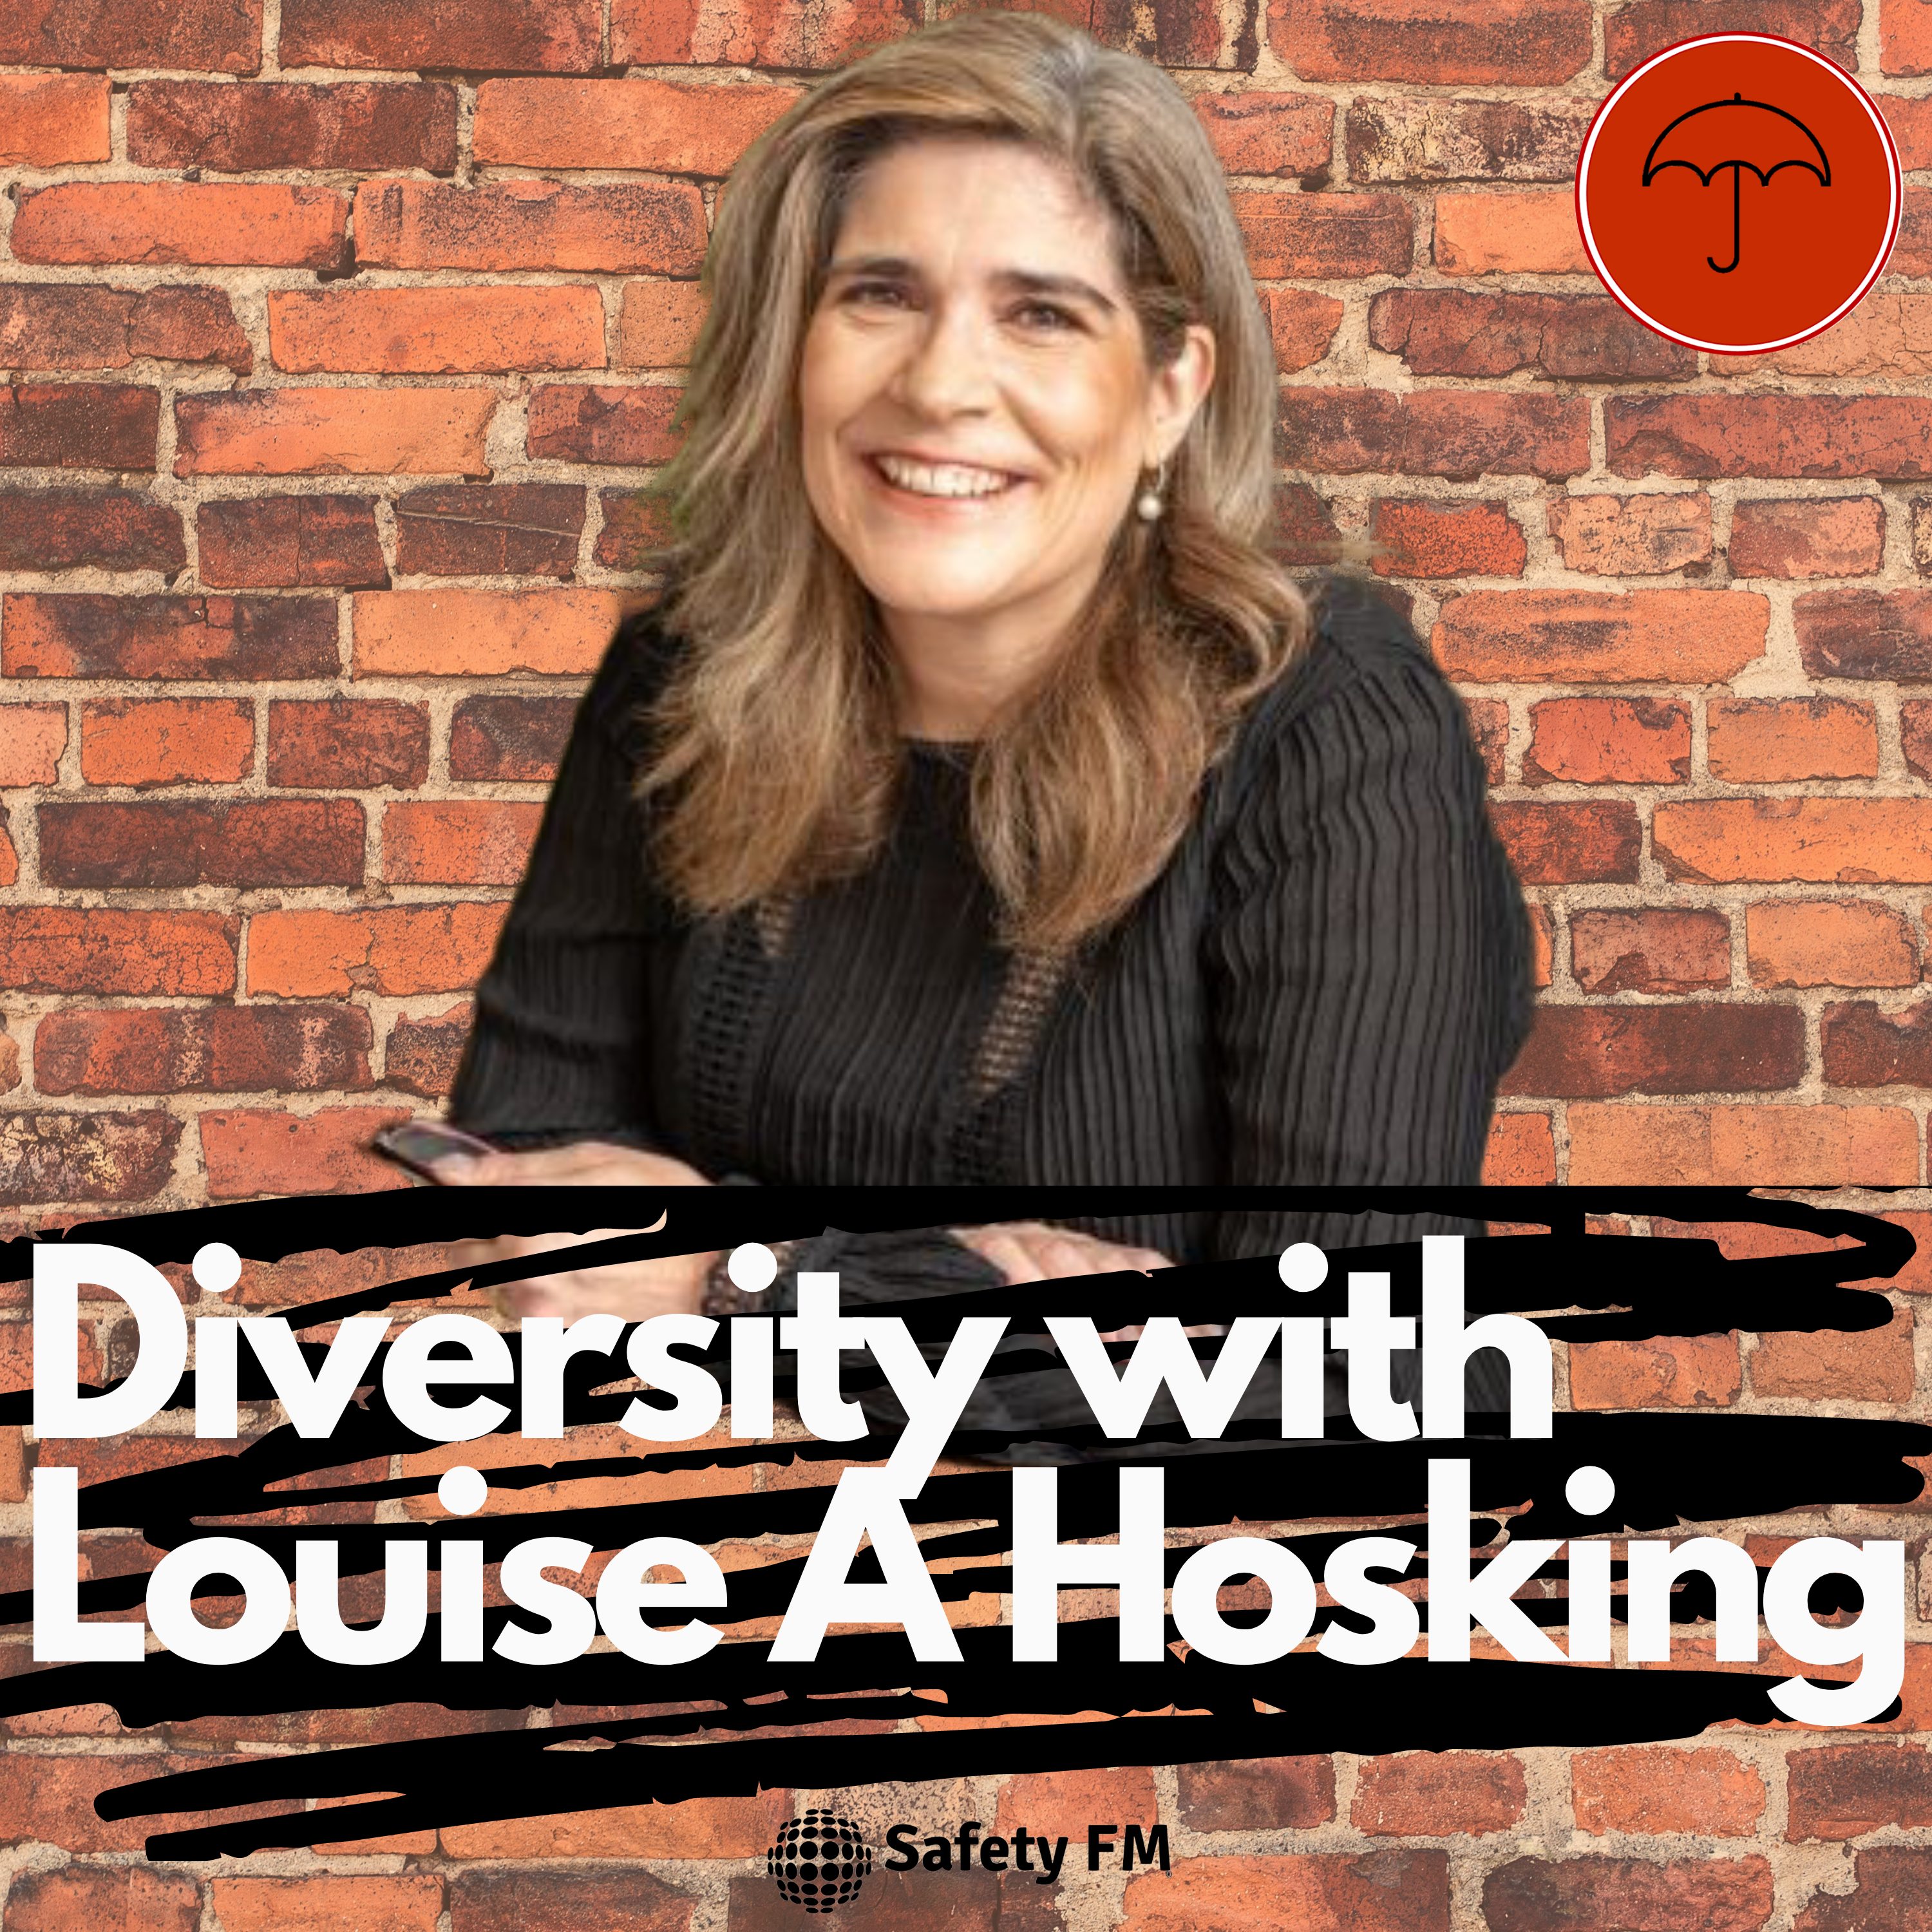 Diversity with Louise A Hosking